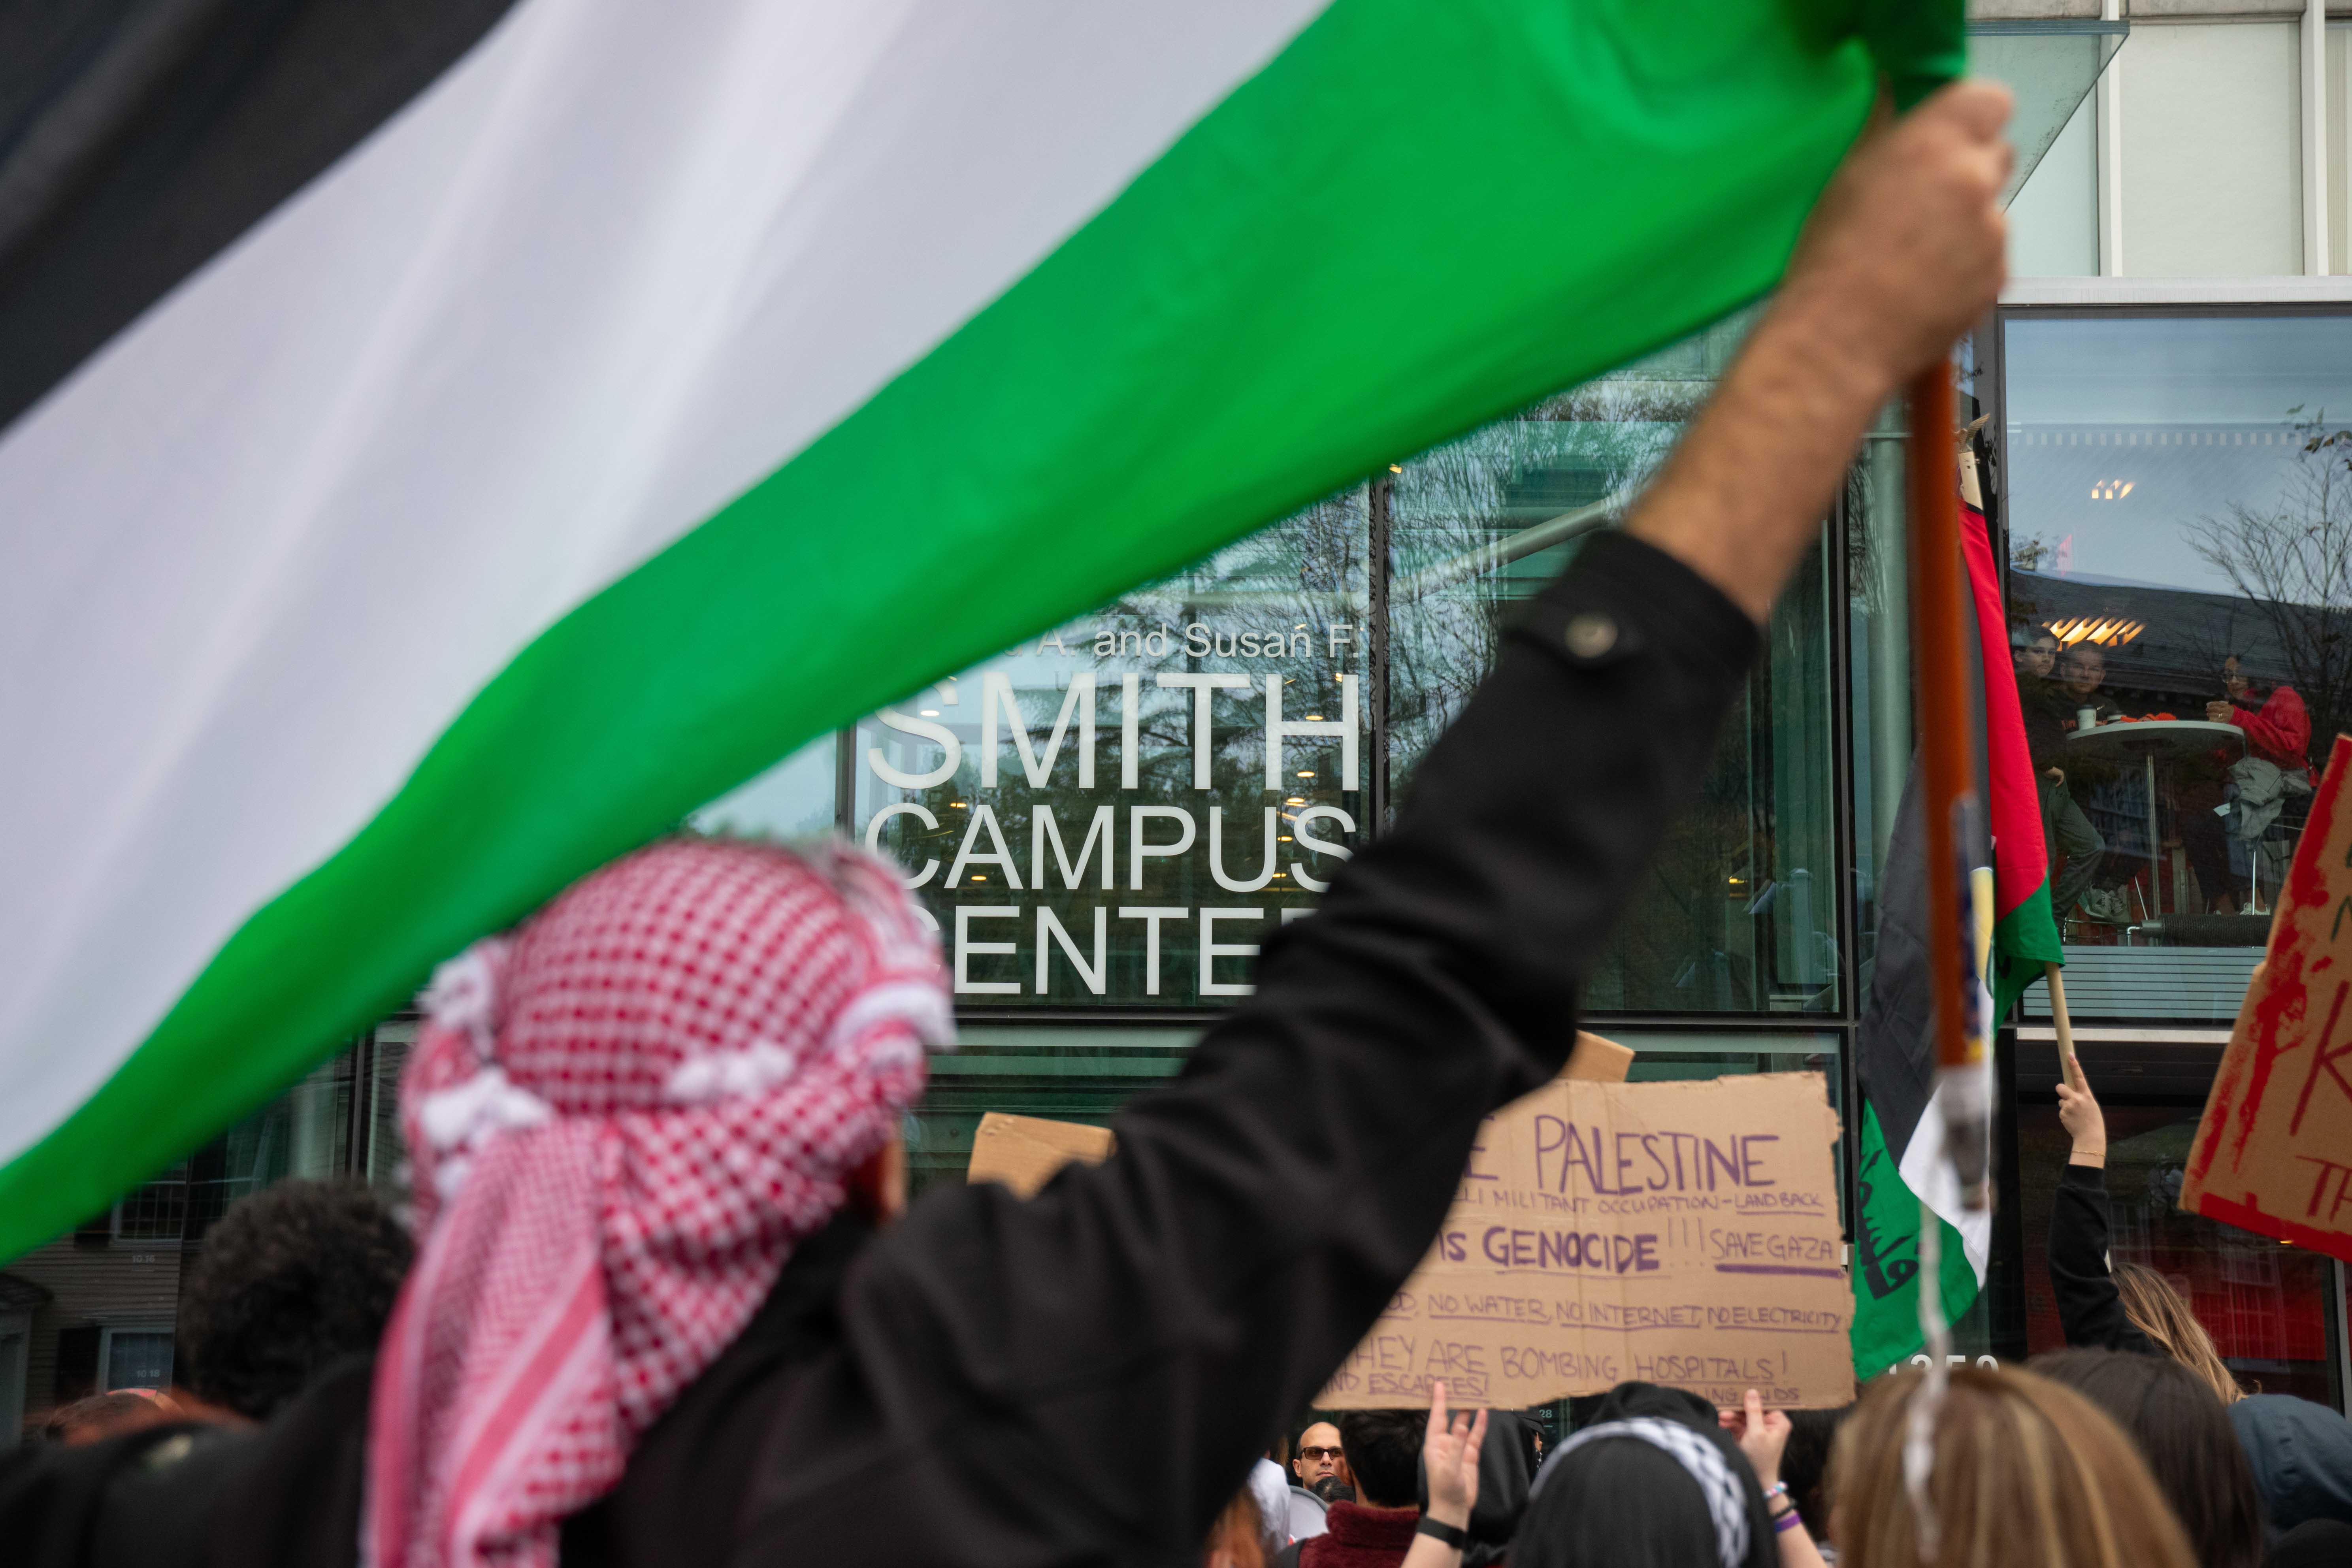 After the rally dispersed, more than 150 attendees took to the streets of Harvard Square in an unplanned protest. The protesters gathered in front of Smith Campus Center, chanting “occupation is a crime, free Palestine in our time” and “ceasefire now” before disbanding.